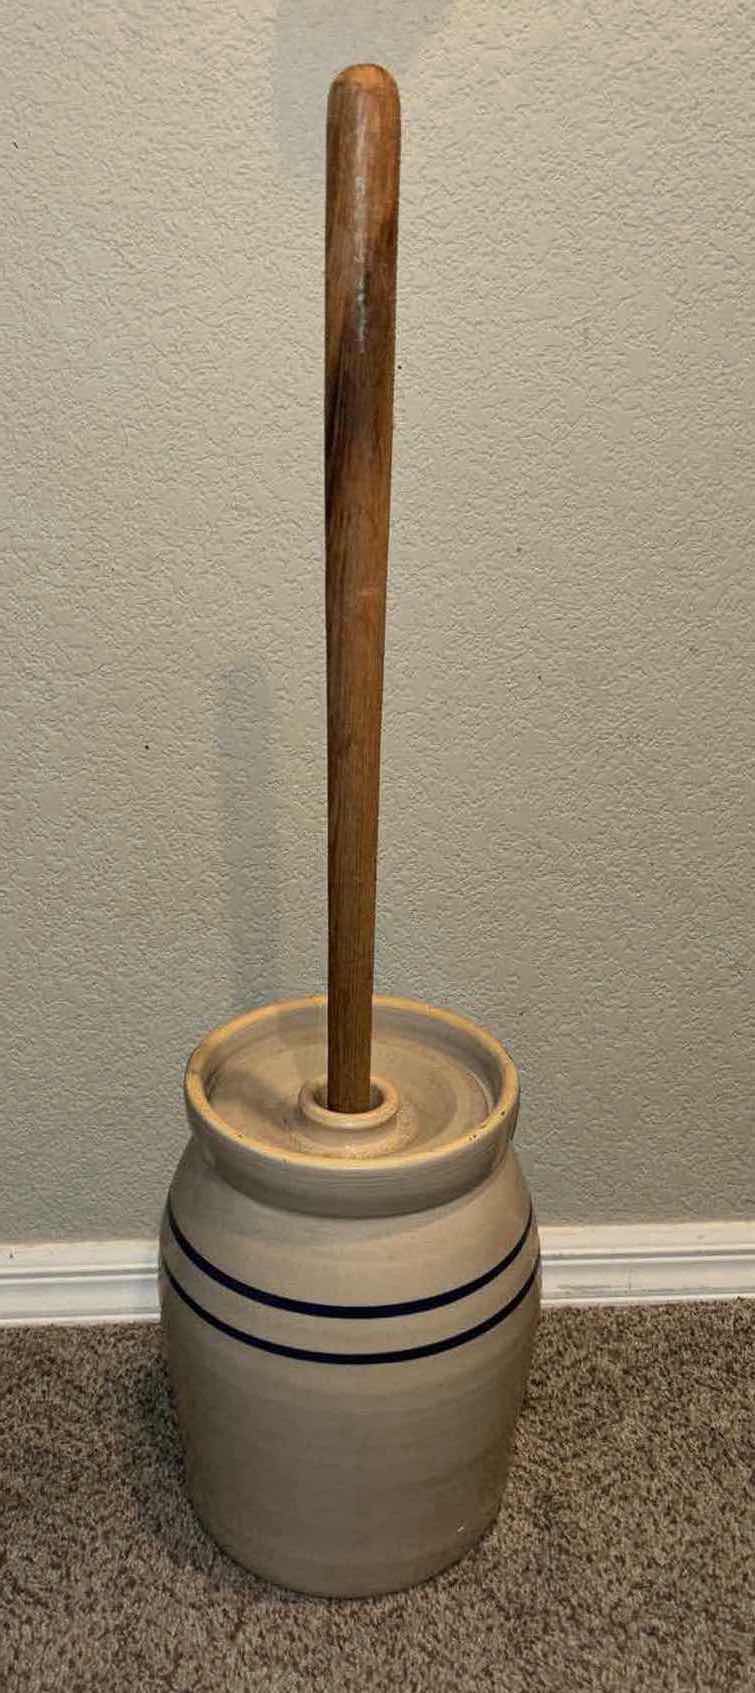 Photo 1 of VINTAGE HAND-TURNED BUTTER CHURN, STONEWARE DASHER STYLE, 2 GALLON